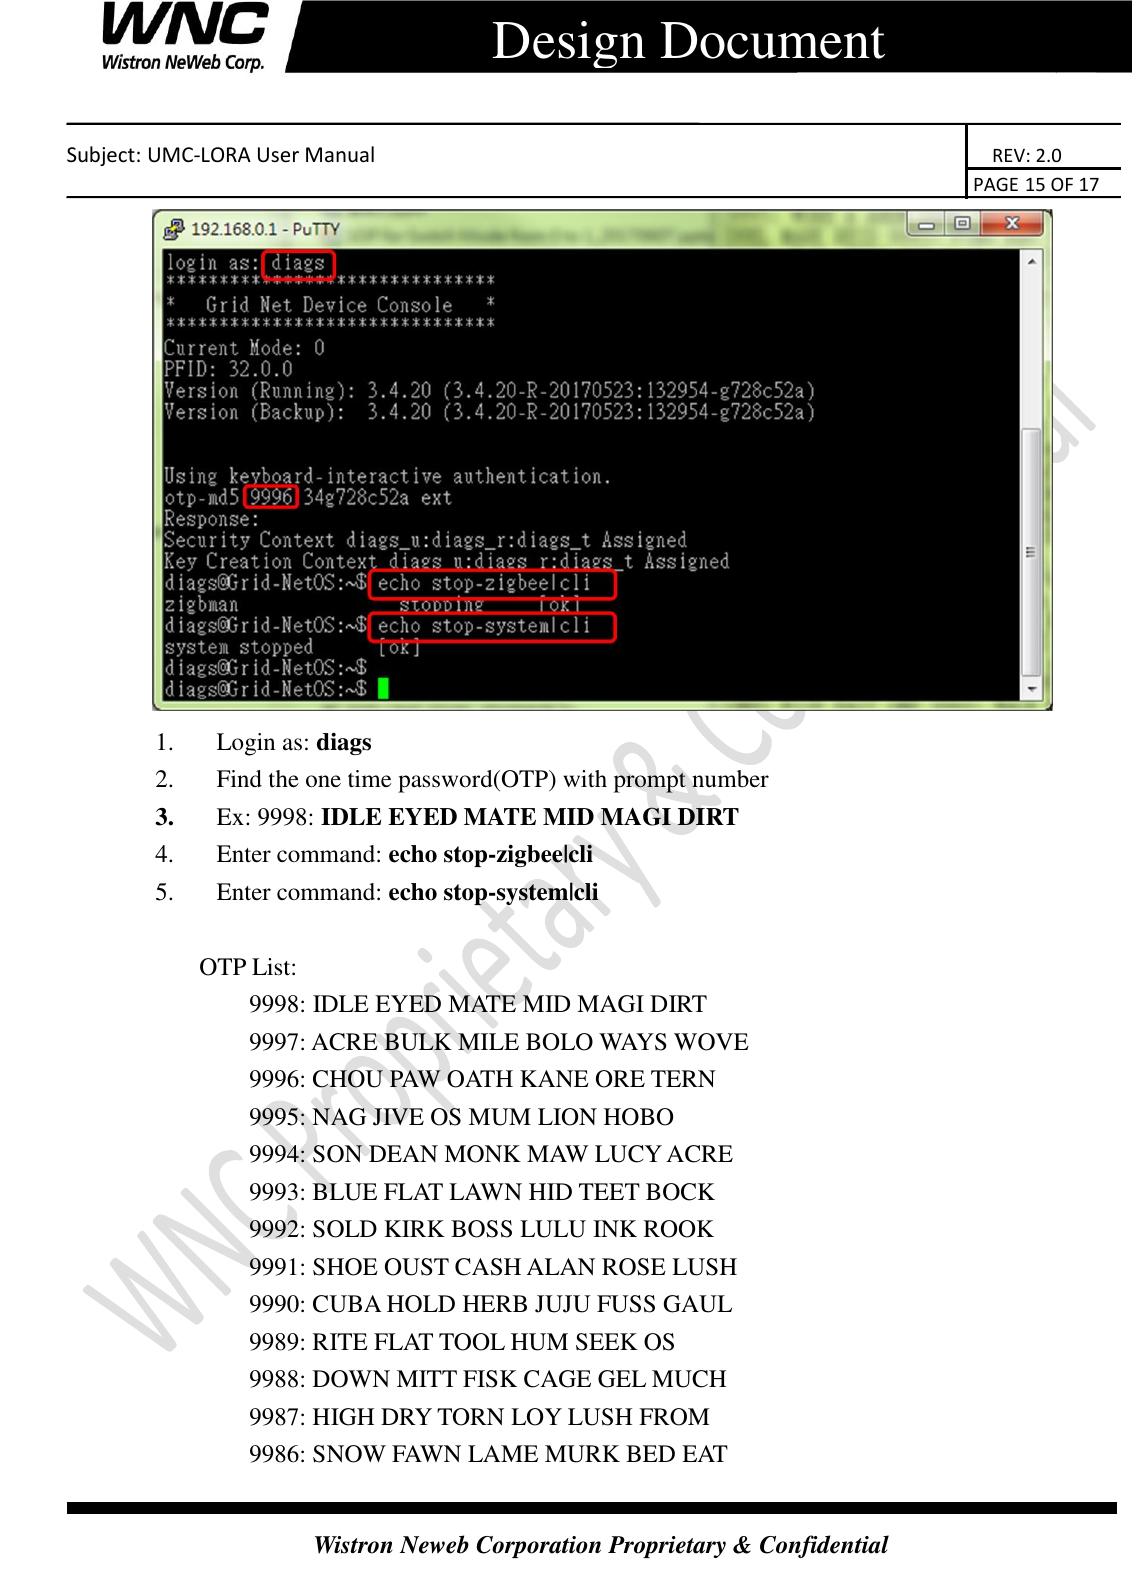    Subject: UMC-LORA User Manual                                                                      REV: 2.0                                                                                        PAGE 15 OF 17  Wistron Neweb Corporation Proprietary &amp; Confidential      Design Document  1. Login as: diags   2. Find the one time password(OTP) with prompt number 3. Ex: 9998: IDLE EYED MATE MID MAGI DIRT 4. Enter command: echo stop-zigbee|cli   5. Enter command: echo stop-system|cli  OTP List: 9998: IDLE EYED MATE MID MAGI DIRT 9997: ACRE BULK MILE BOLO WAYS WOVE 9996: CHOU PAW OATH KANE ORE TERN 9995: NAG JIVE OS MUM LION HOBO 9994: SON DEAN MONK MAW LUCY ACRE 9993: BLUE FLAT LAWN HID TEET BOCK 9992: SOLD KIRK BOSS LULU INK ROOK 9991: SHOE OUST CASH ALAN ROSE LUSH 9990: CUBA HOLD HERB JUJU FUSS GAUL 9989: RITE FLAT TOOL HUM SEEK OS 9988: DOWN MITT FISK CAGE GEL MUCH 9987: HIGH DRY TORN LOY LUSH FROM 9986: SNOW FAWN LAME MURK BED EAT 